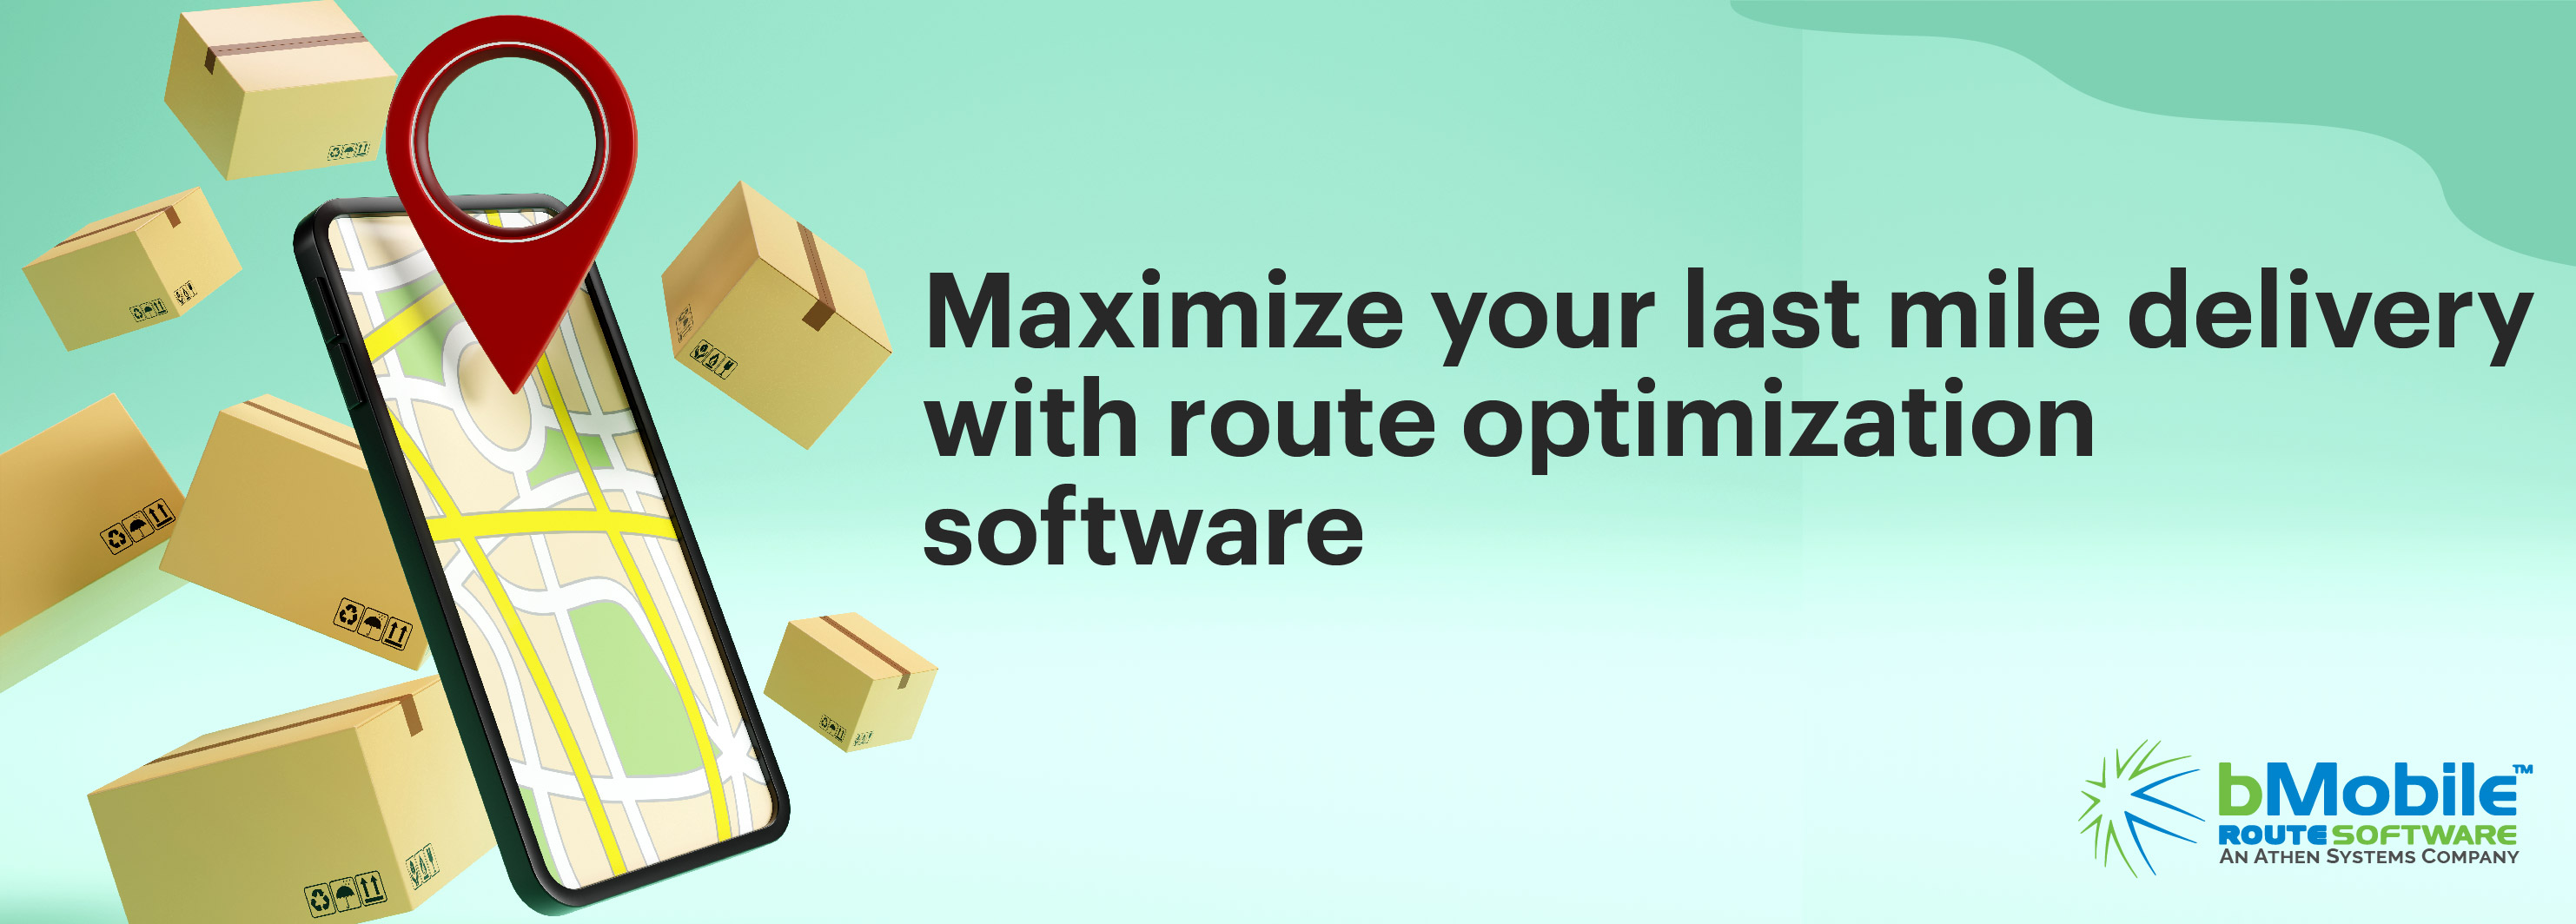 Maximize your last mile delivery with route optimization software